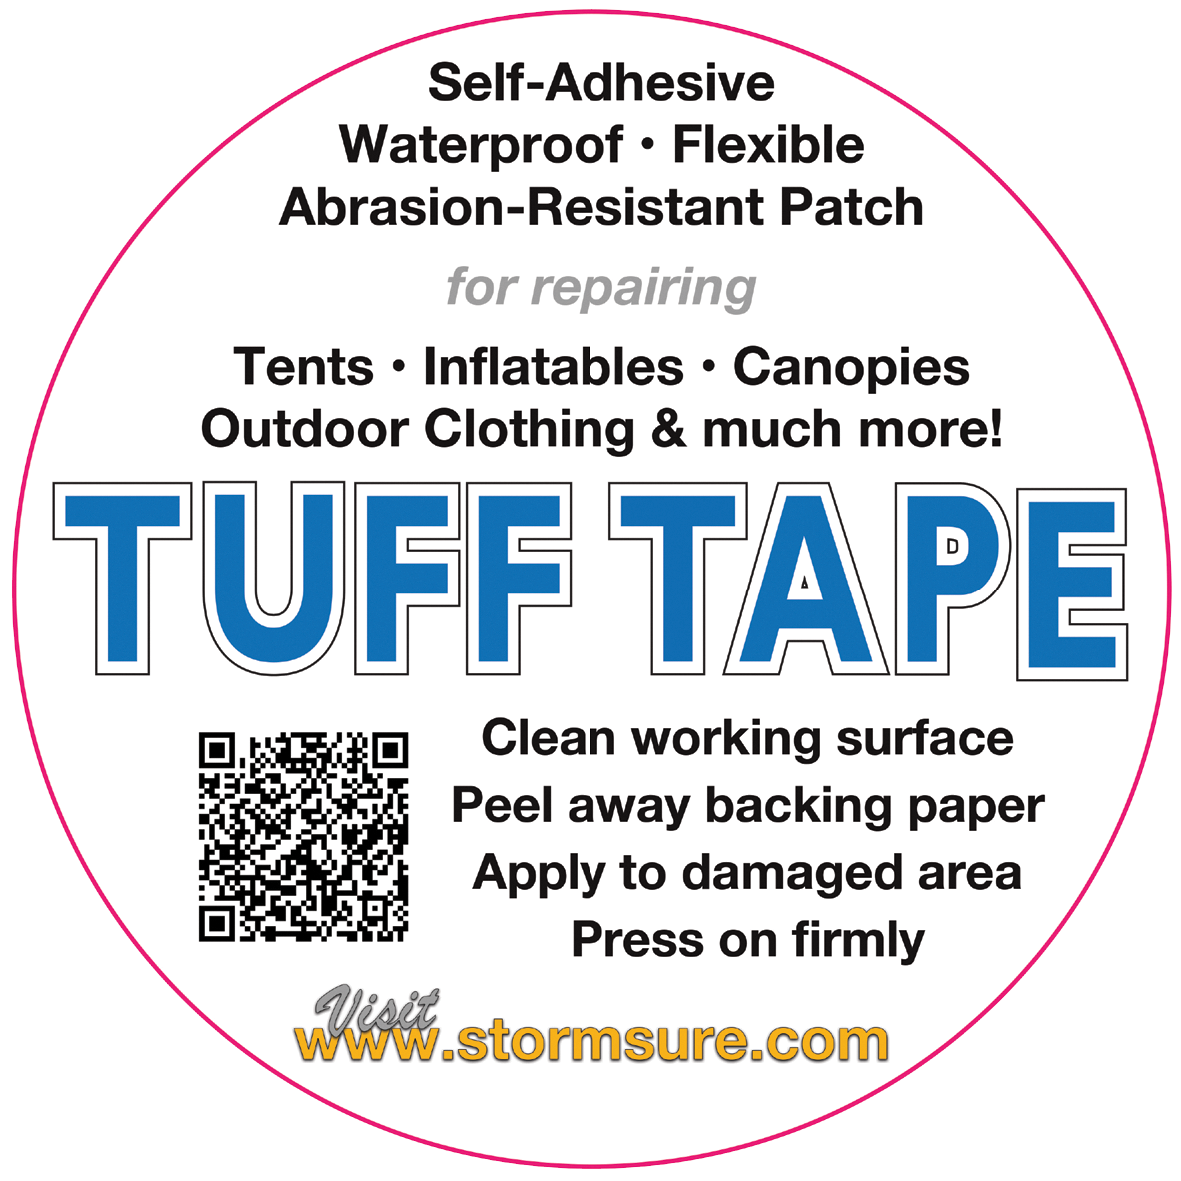 Summit Emergency Repair Tape repair tents groundsheets awnings and clothing 